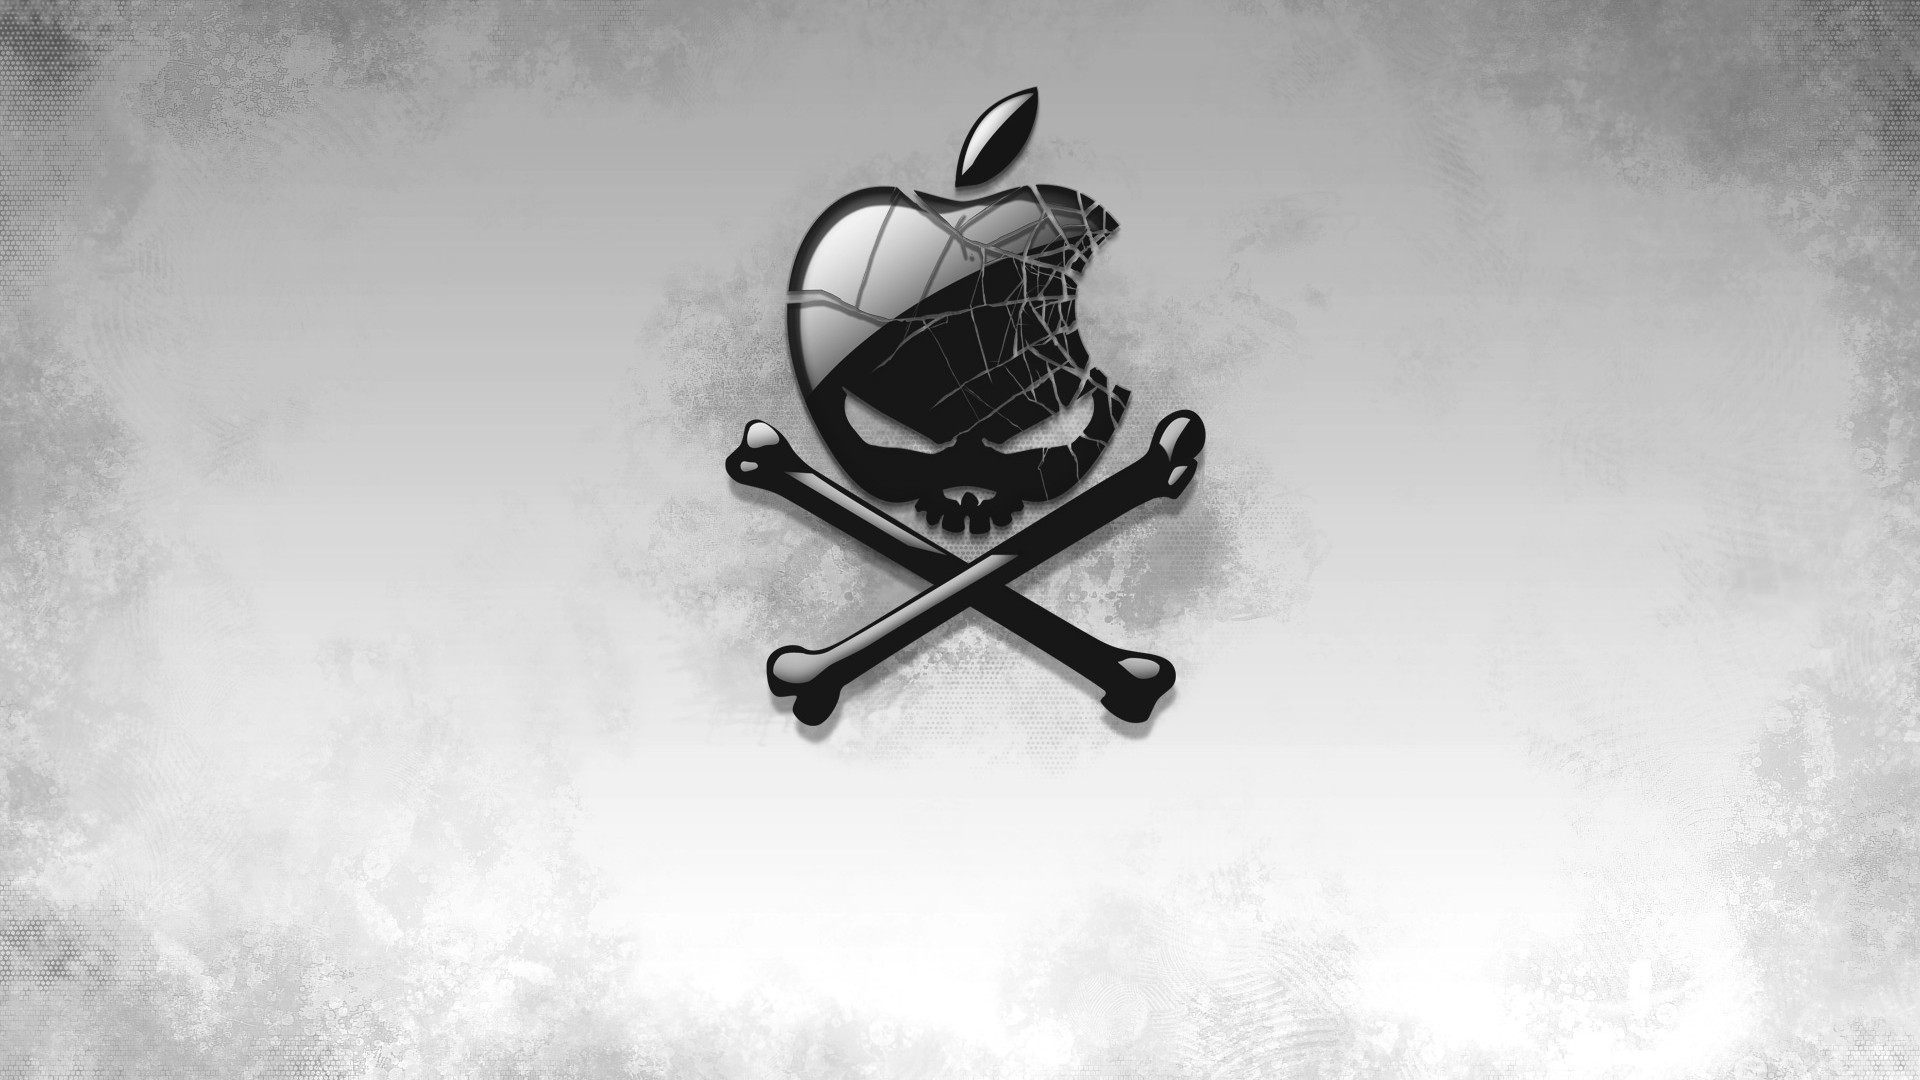 Apple Backgrounds download free | Wallpapers, Backgrounds, Images ...